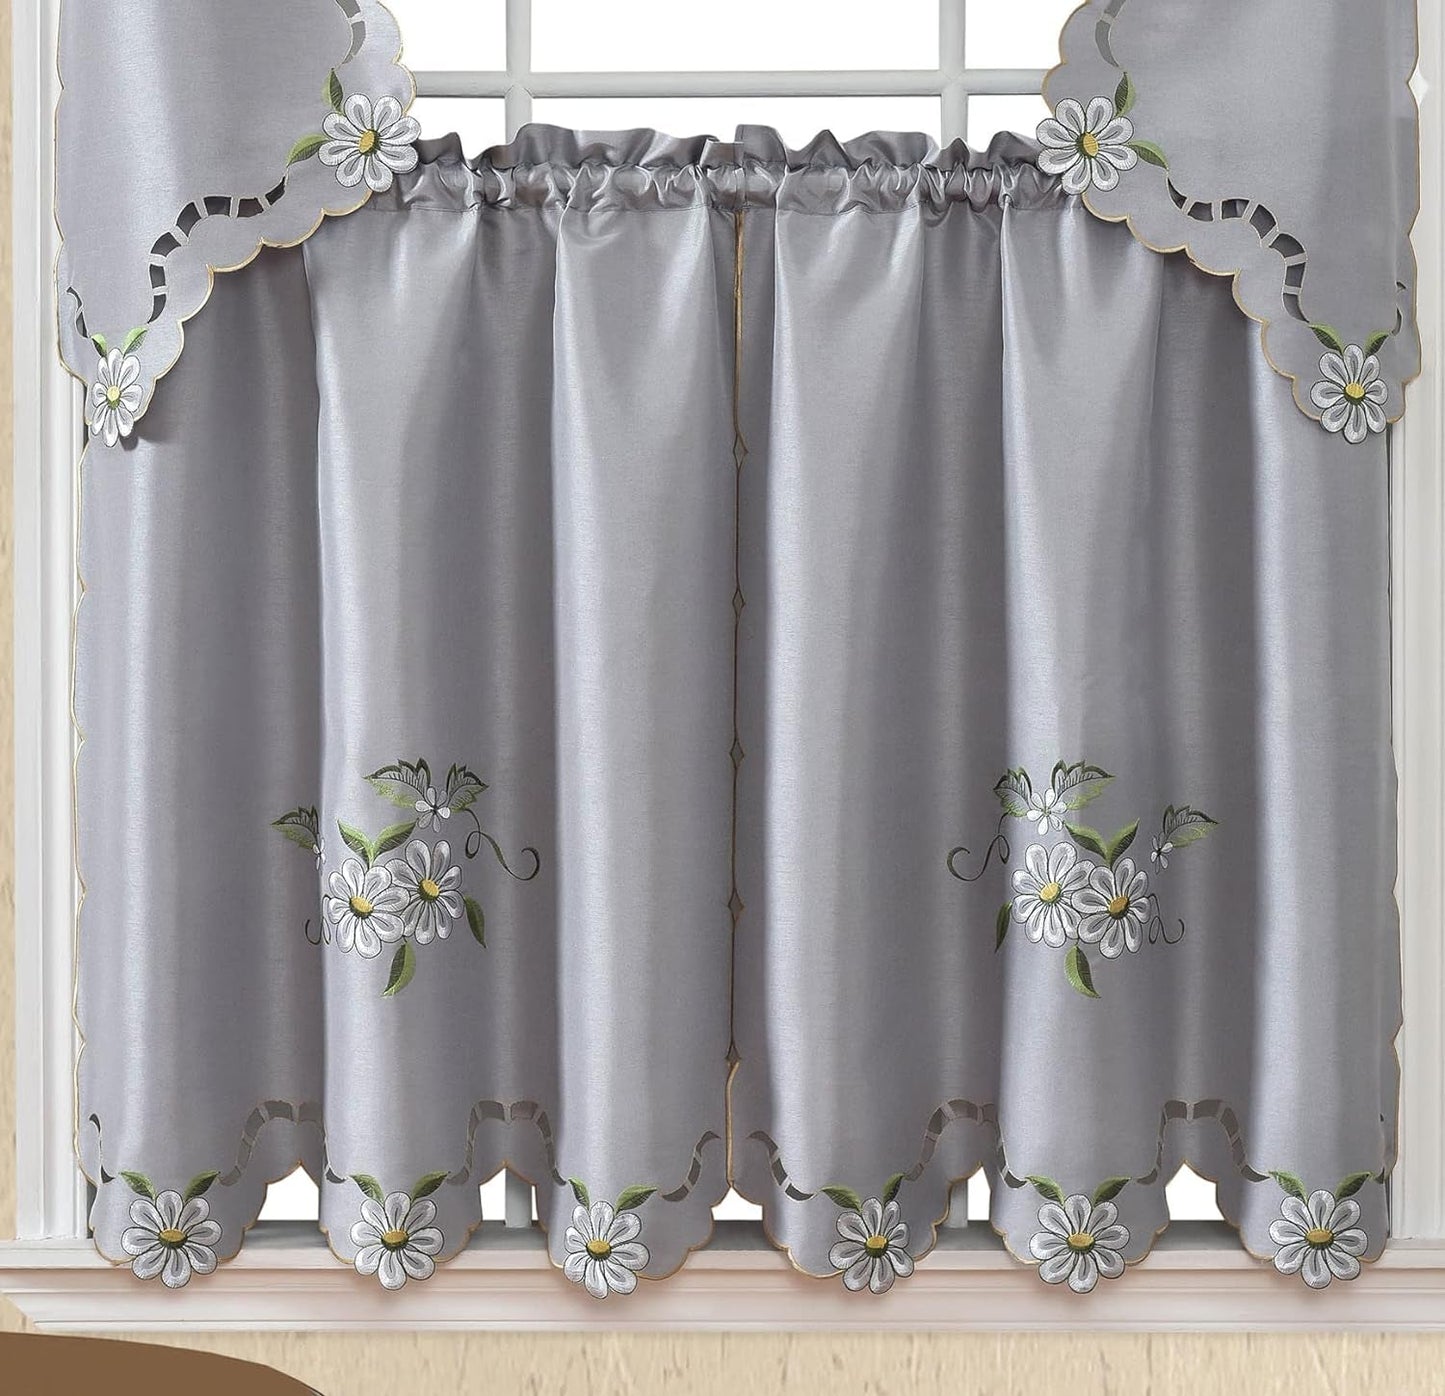 GOHD Cutwork Floral. Kitchen Curtain Set. Swag Valance and Tier Set. Nice Embroidery on Faux Silk Fabric with Cutworks. (Grey)